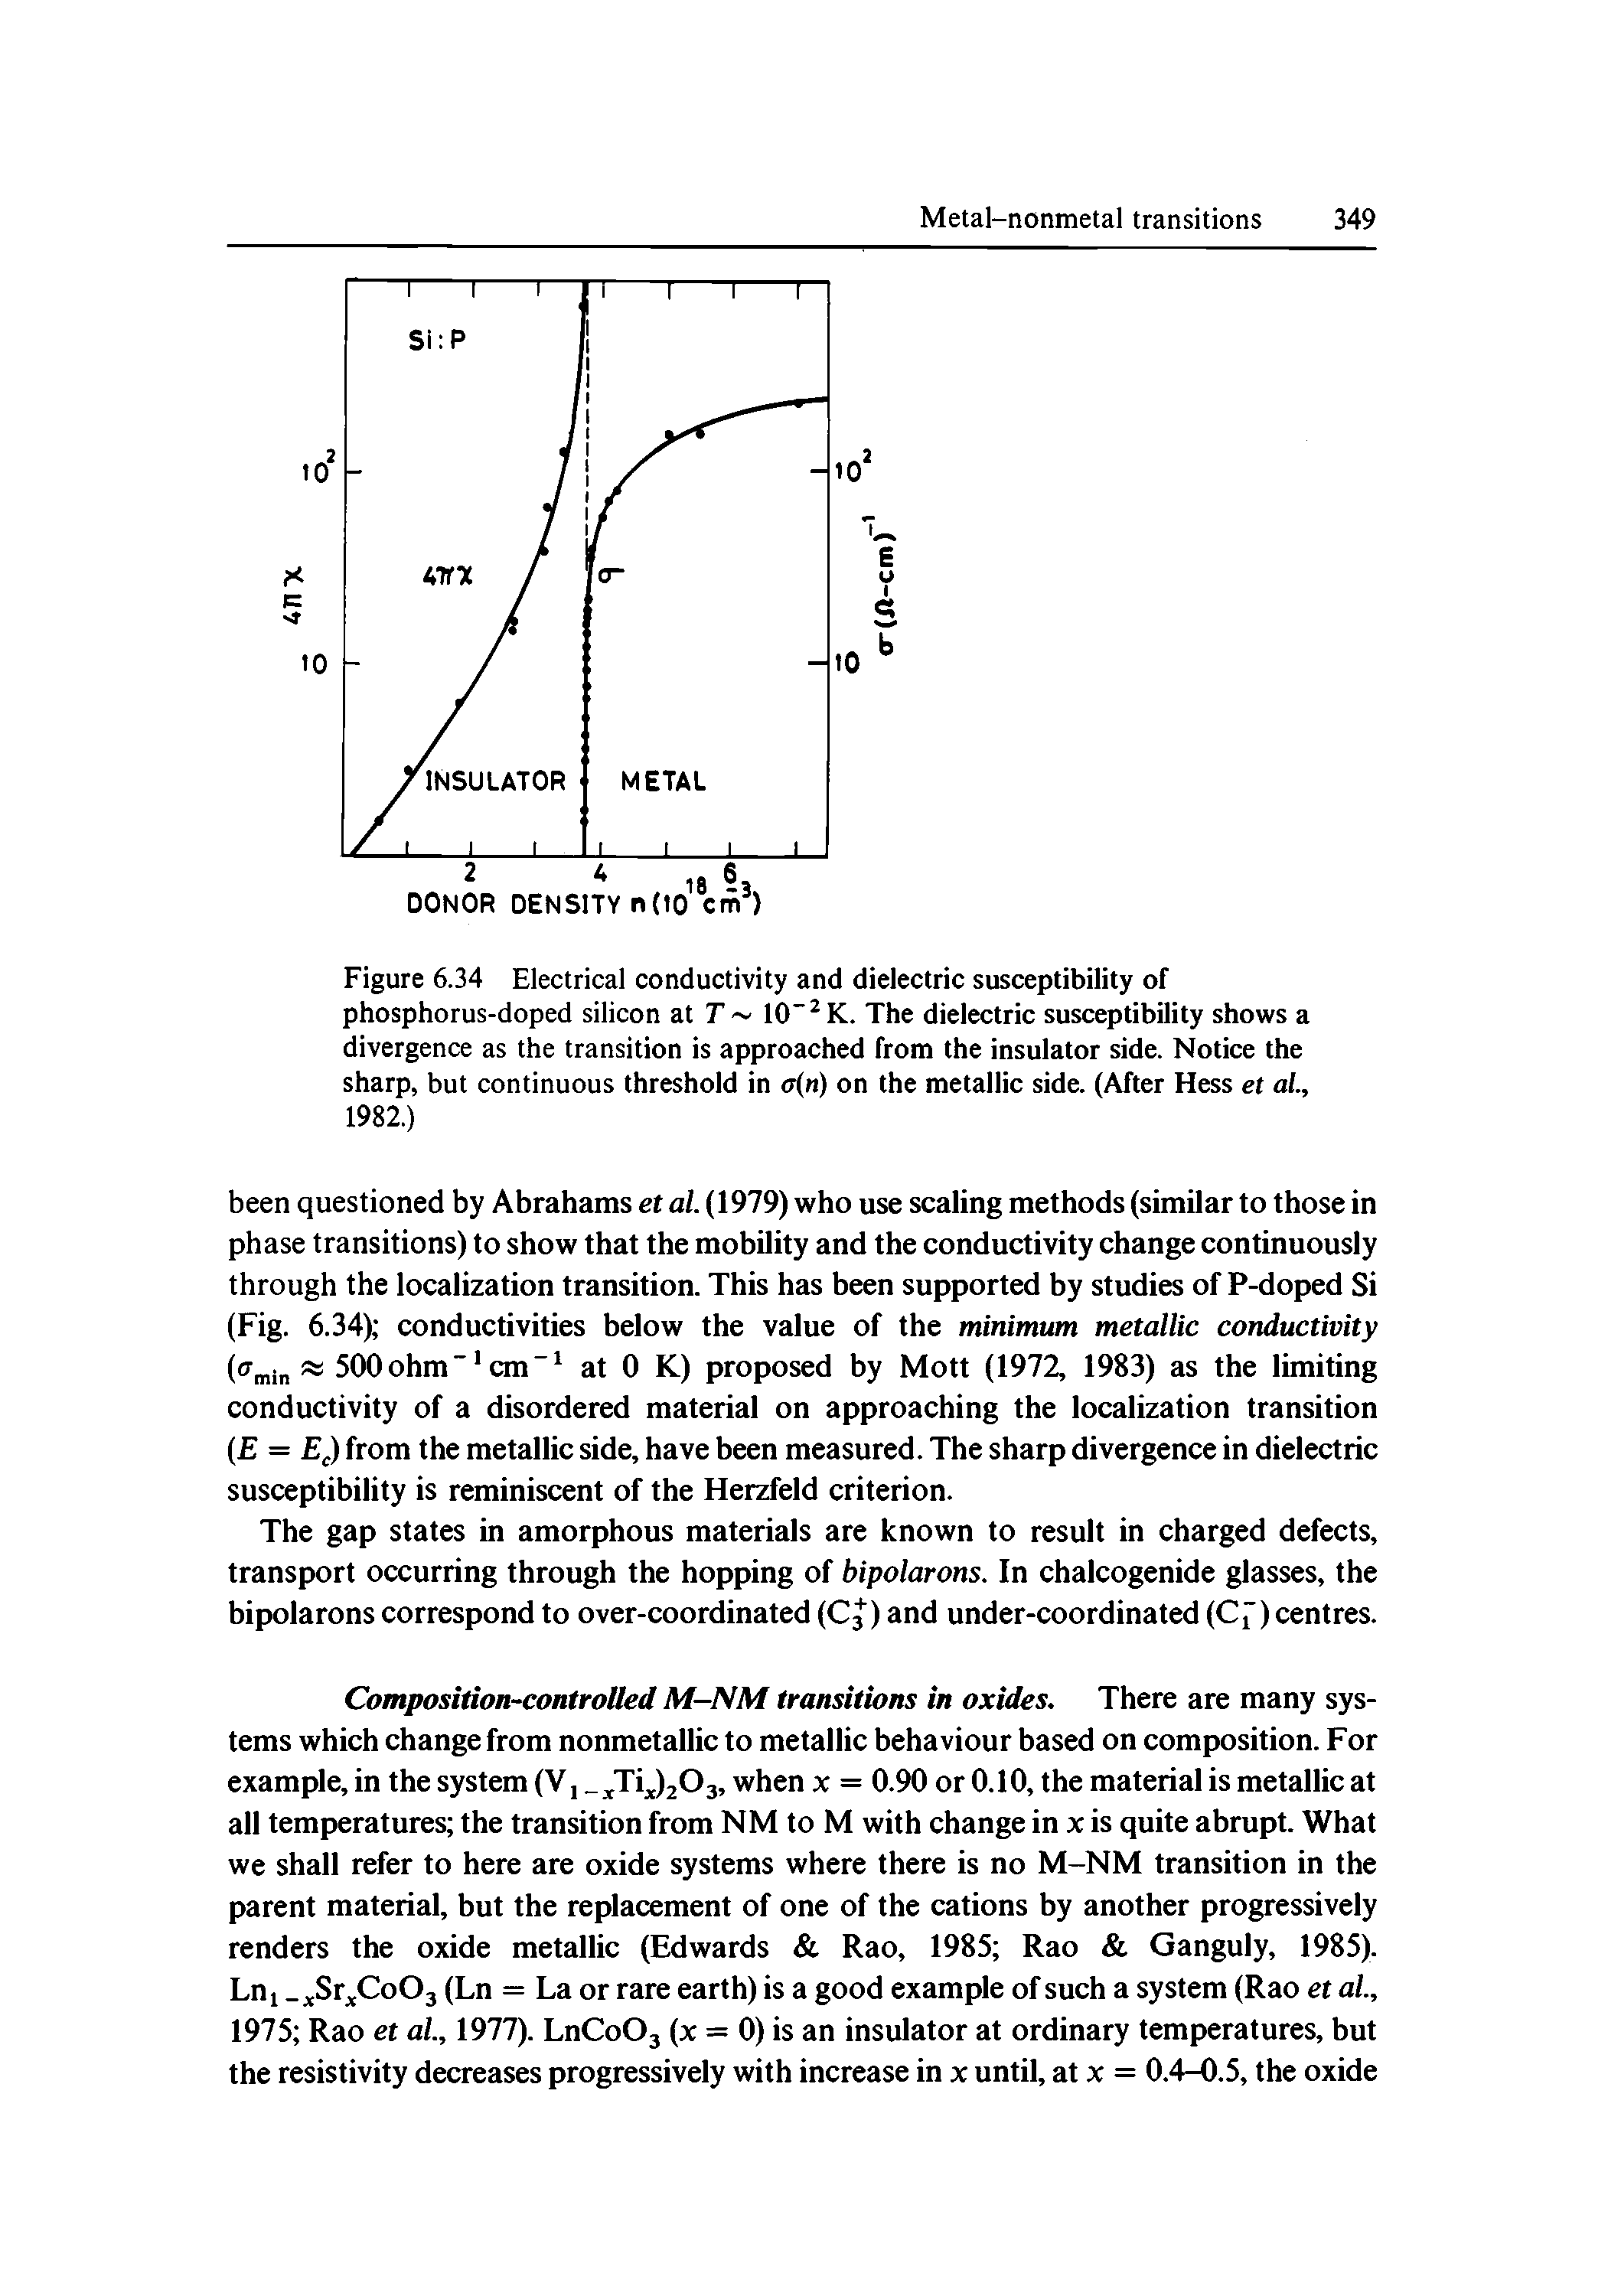 Figure 6.34 Electrical conductivity and dielectric susceptibility of phosphorus-doped silicon at T 10" K. The dielectric susceptibility shows a divergence as the transition is approached from the insulator side. Notice the sharp, but continuous threshold in a(n) on the metallic side. (After Hess et ai,...